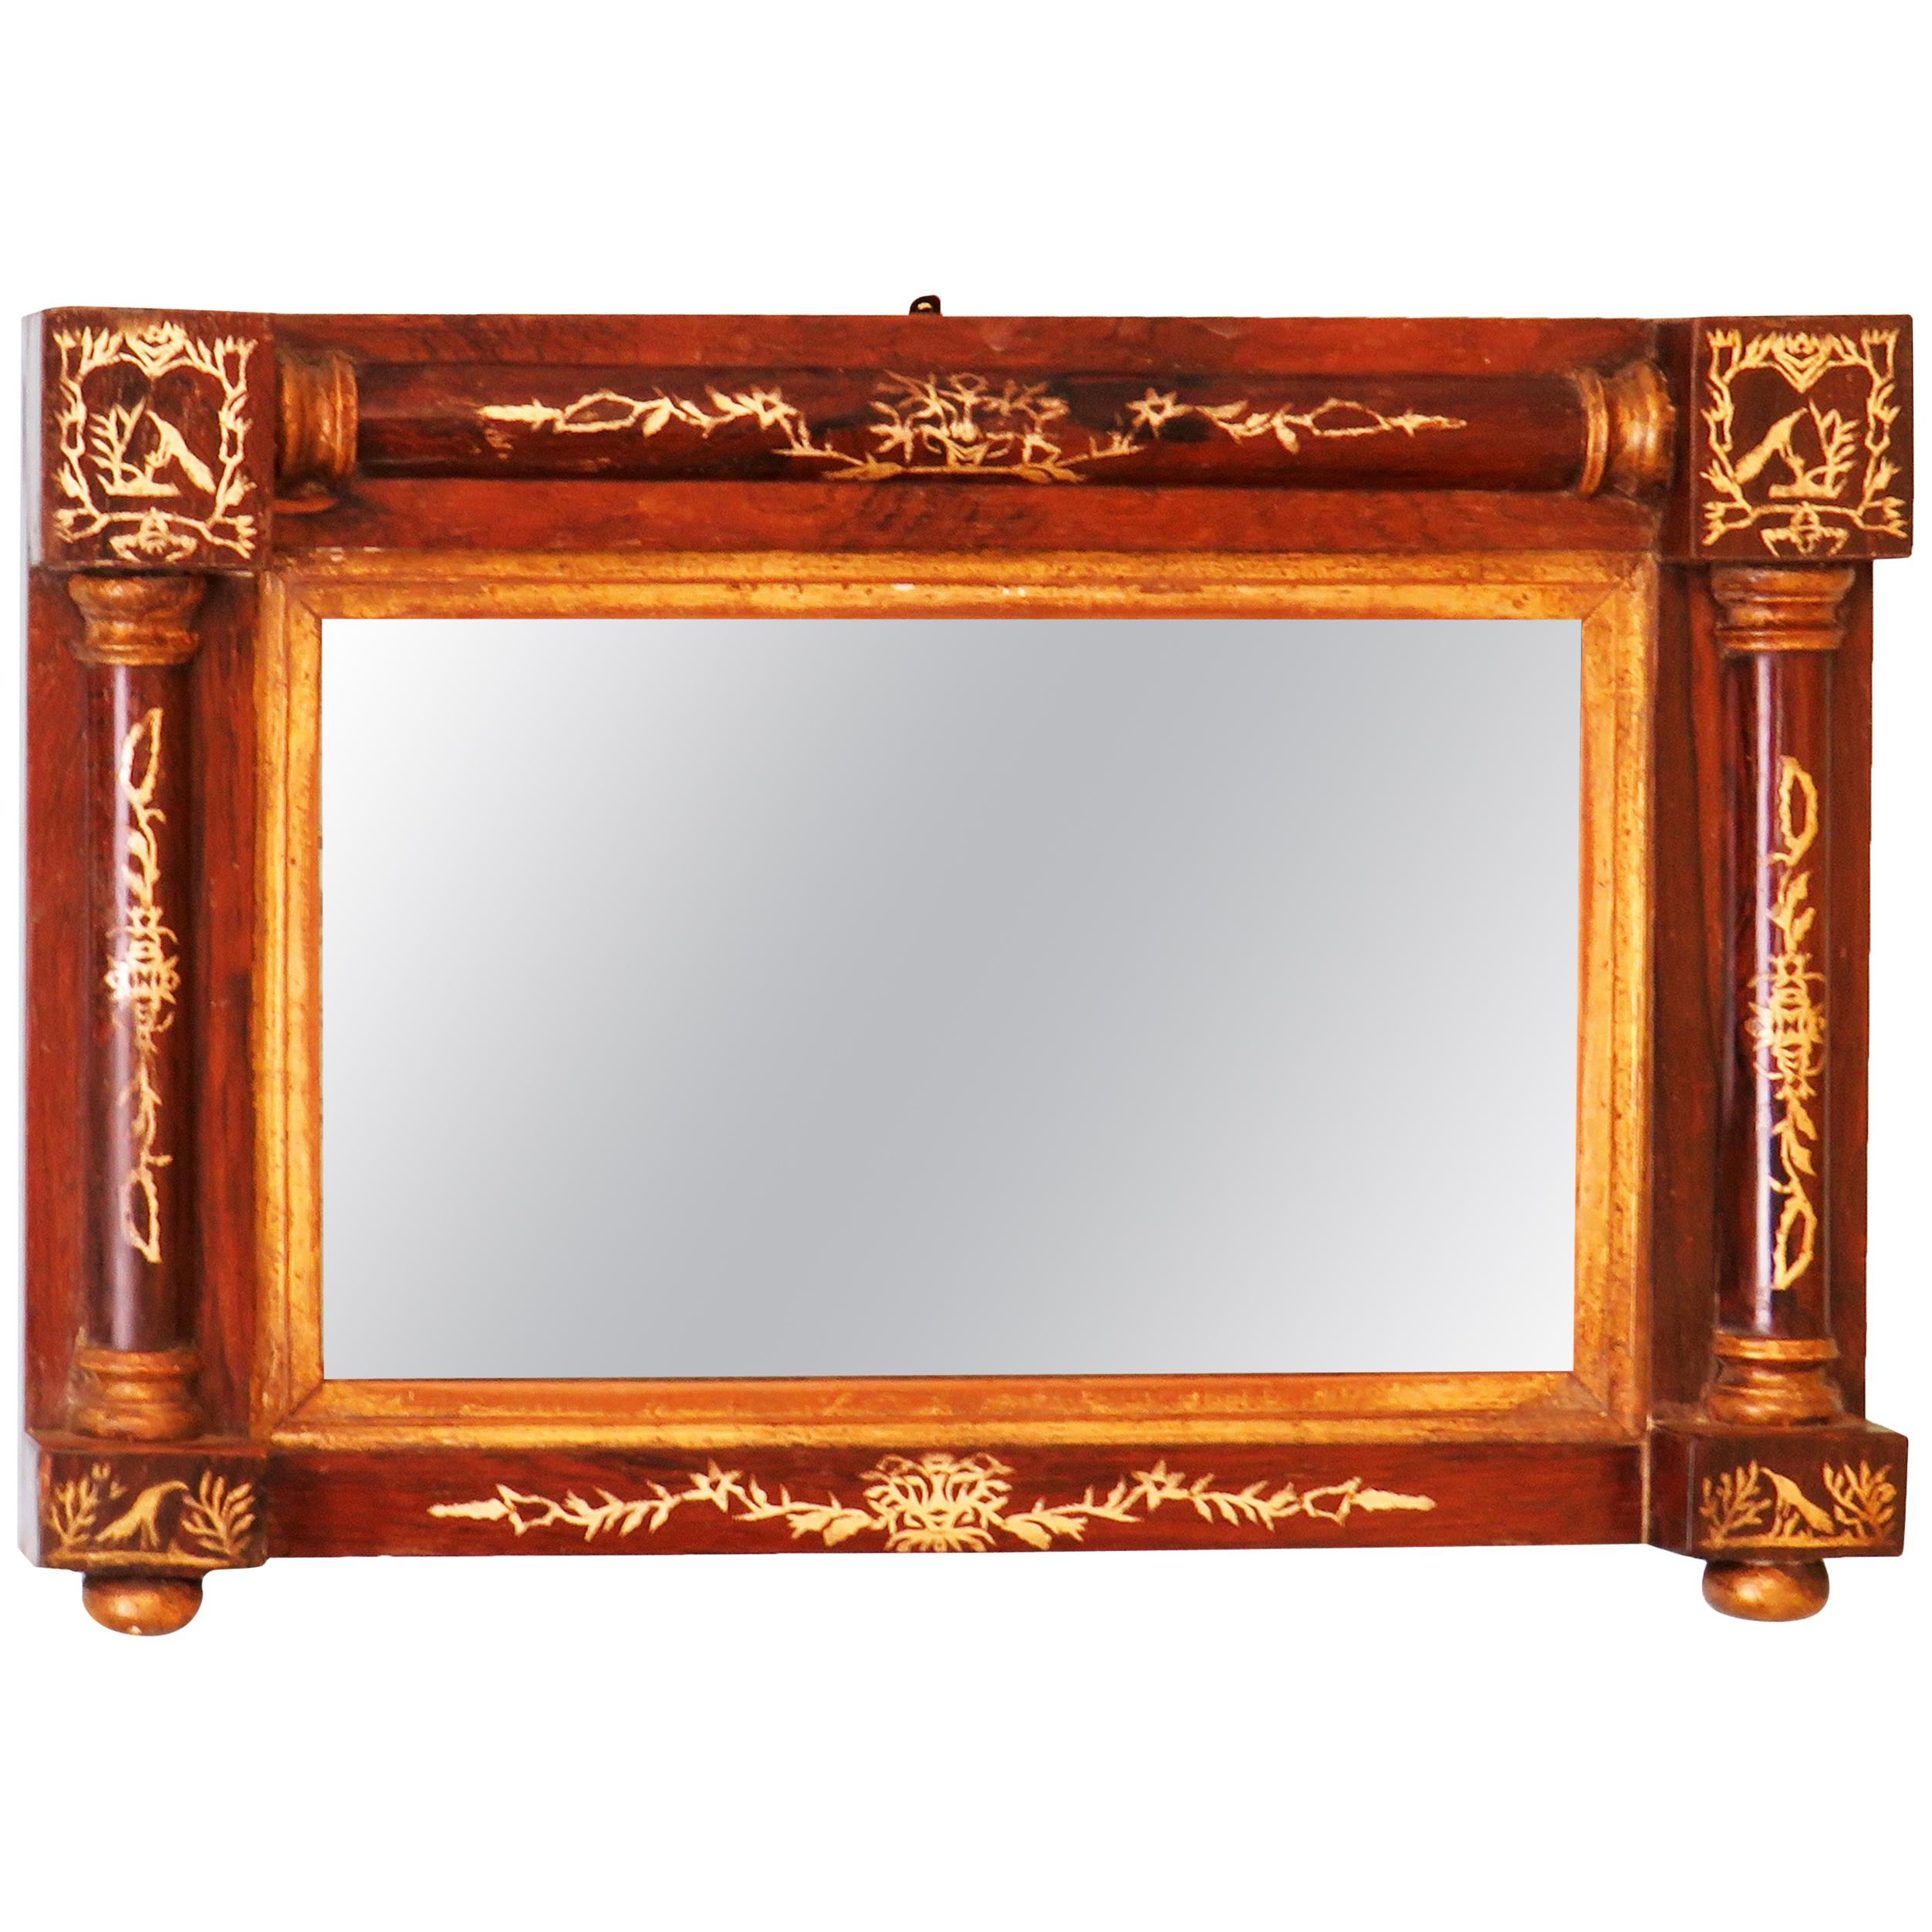 Regency English Rosewood And Gilt Wall Mirror For Sale